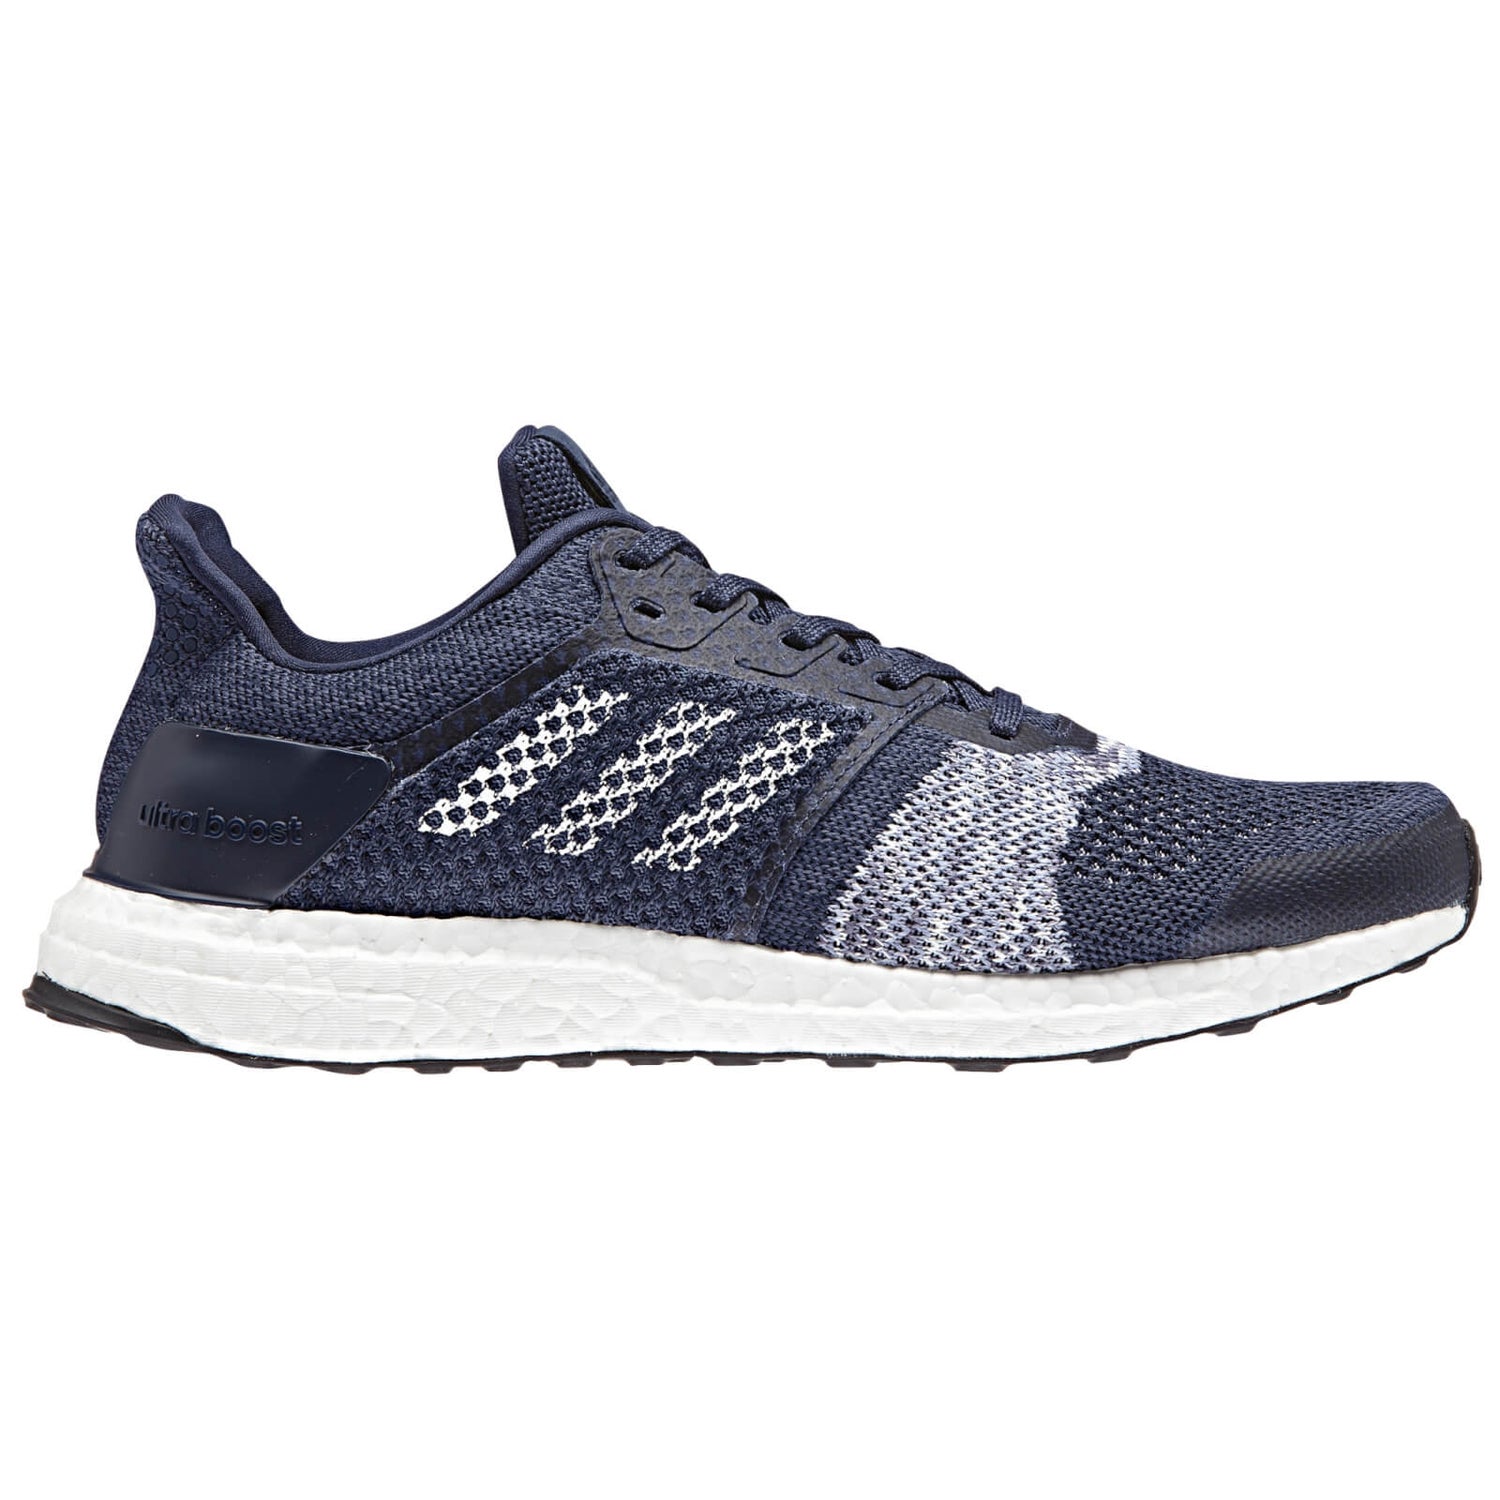 adidas Men's Ultraboost Shoes - White/Navy |